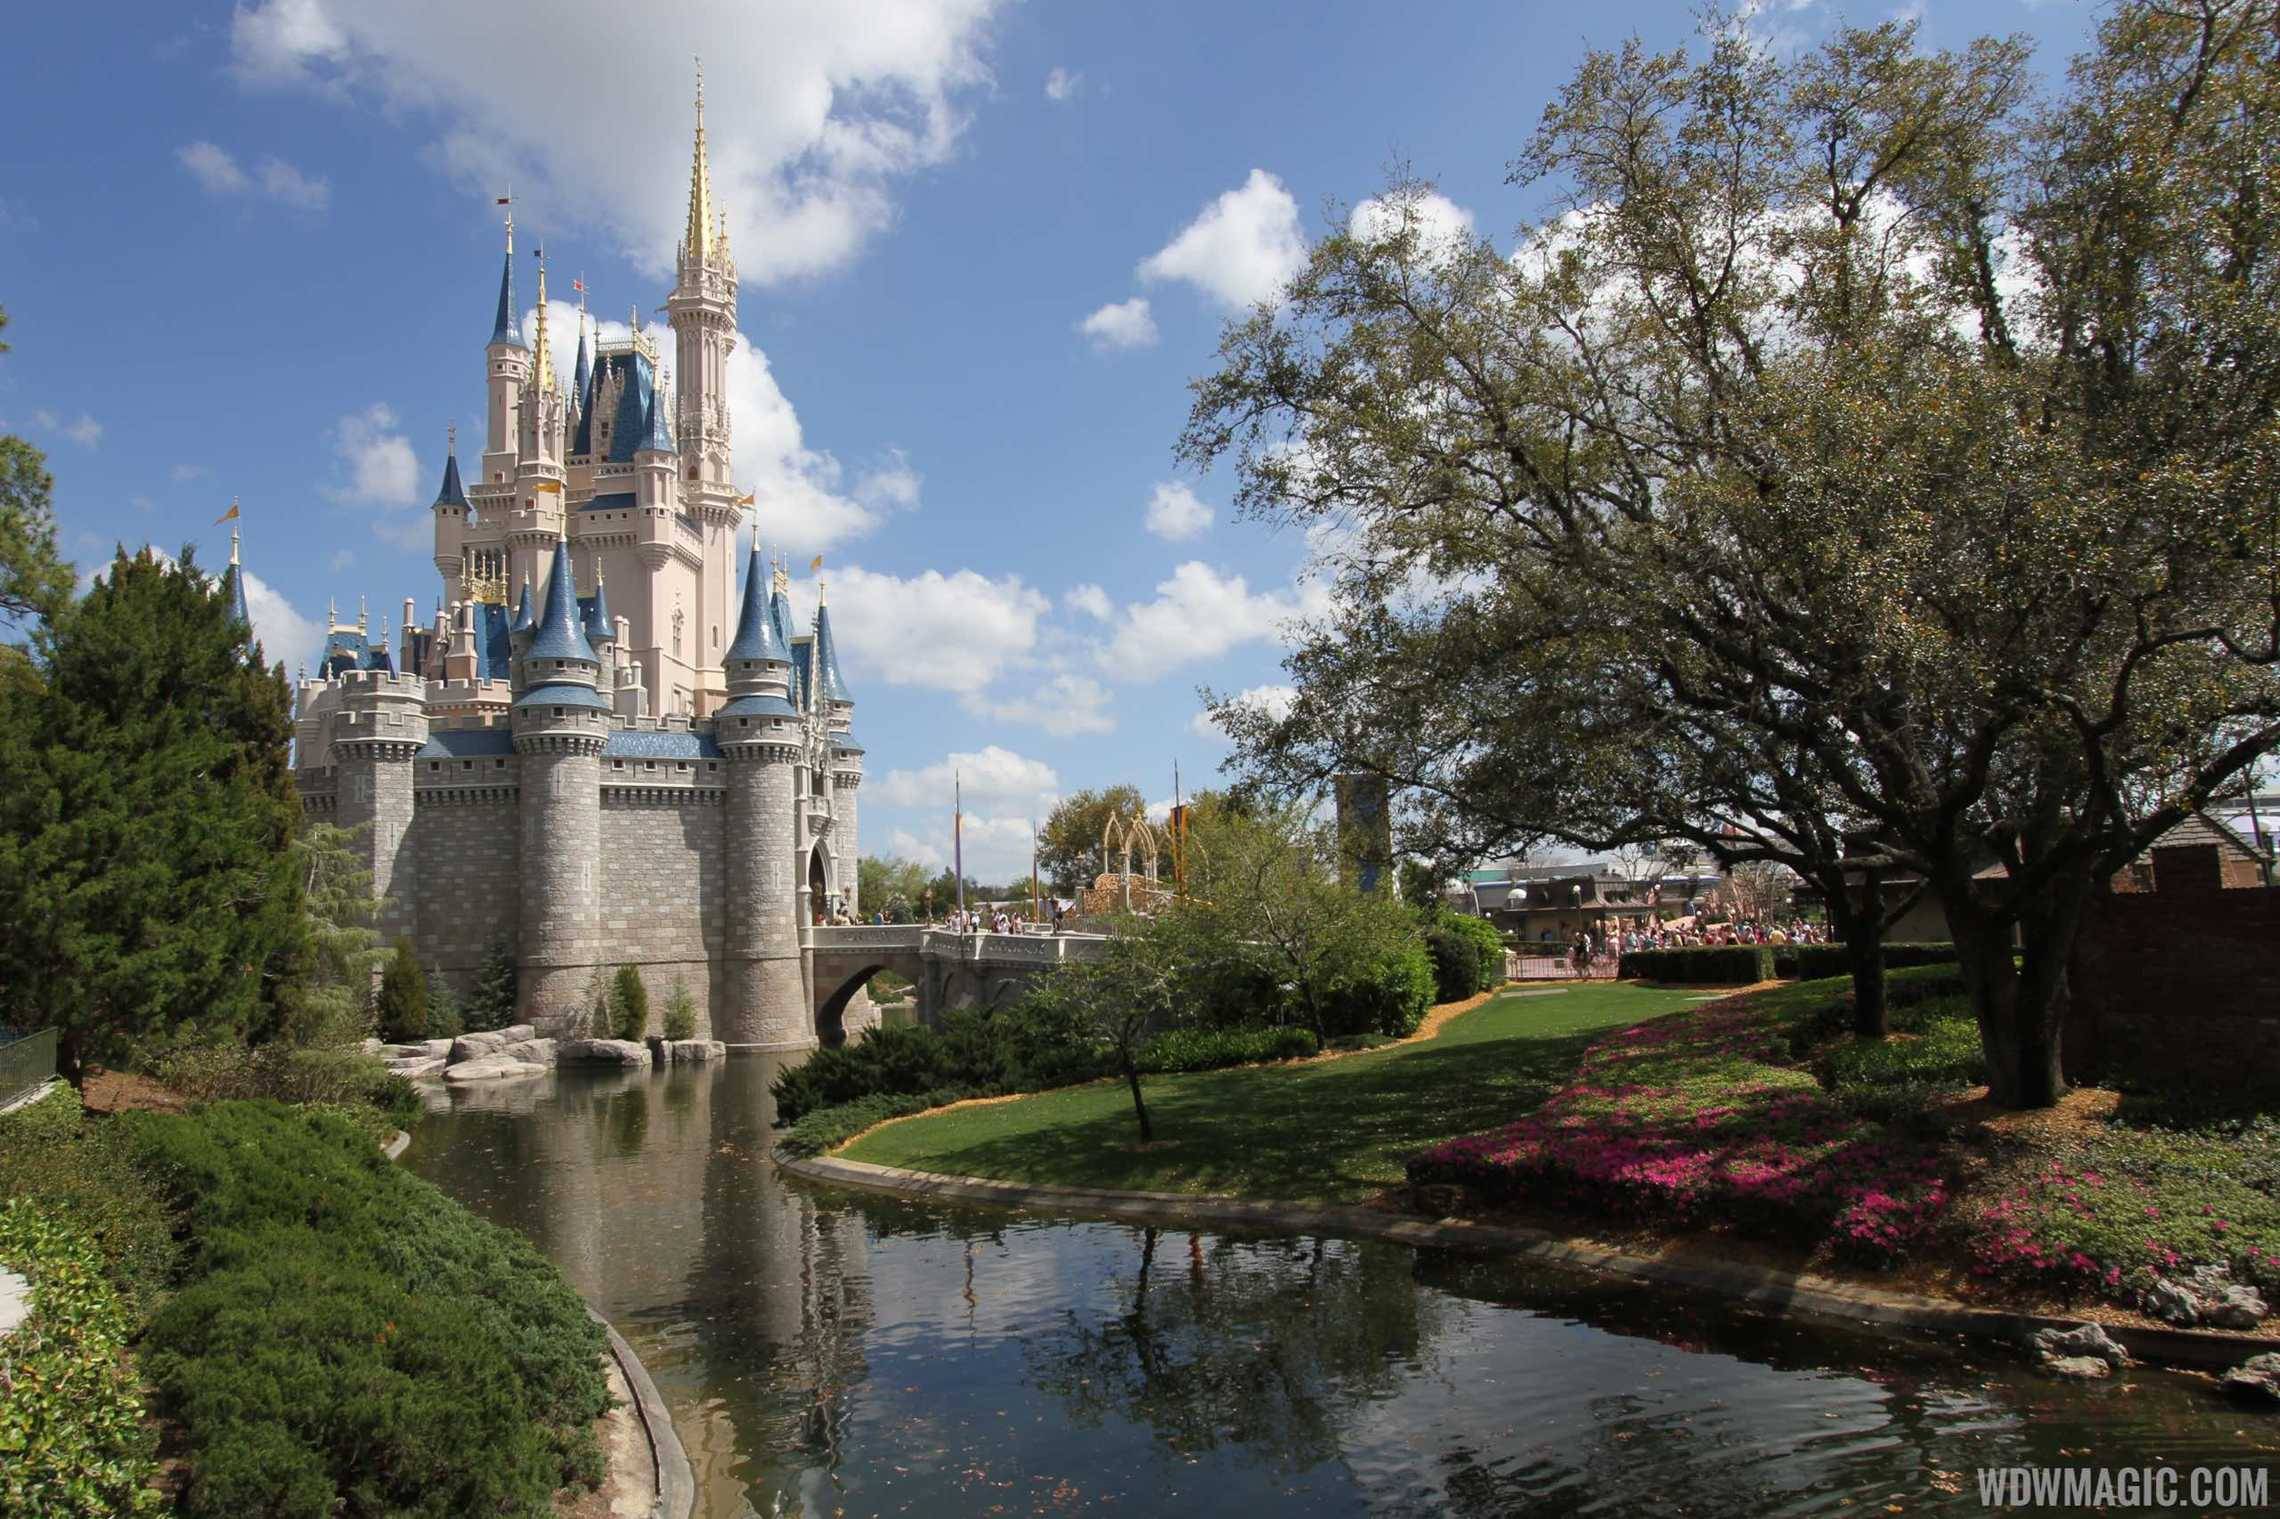 Disney Early Morning Magic to double the number of available attractions